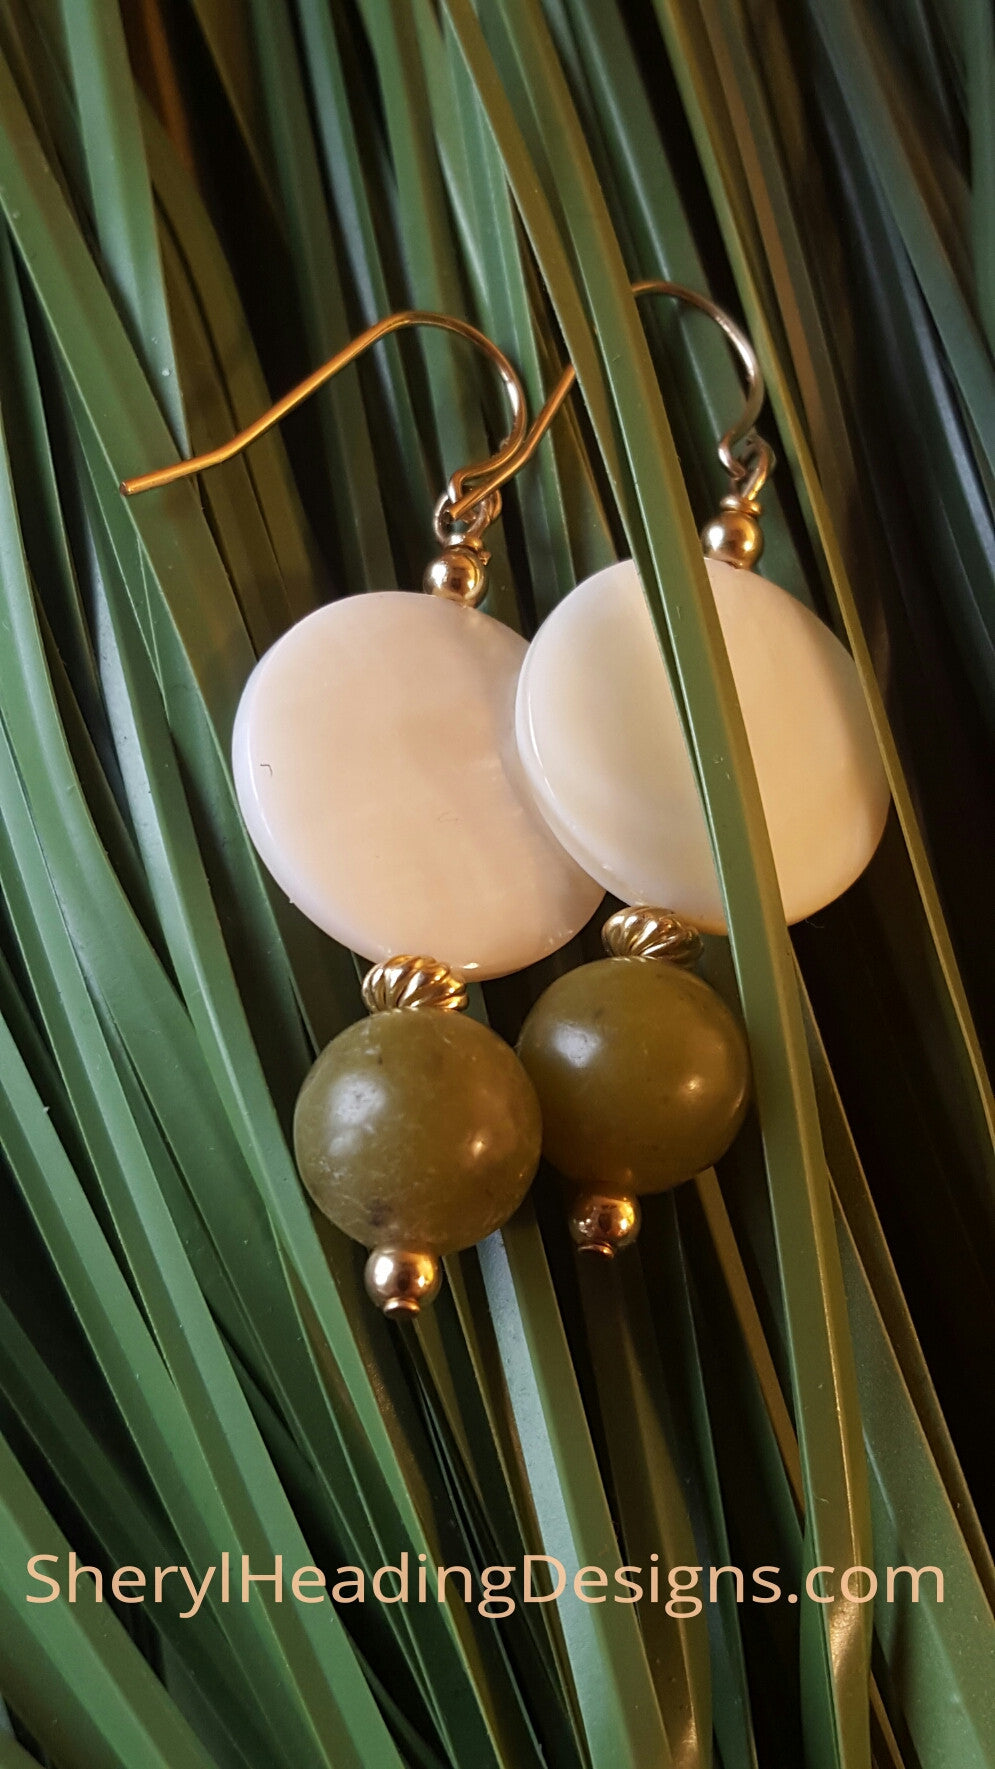 Sure to Please-Green and White Earrings - Sheryl Heading Designs